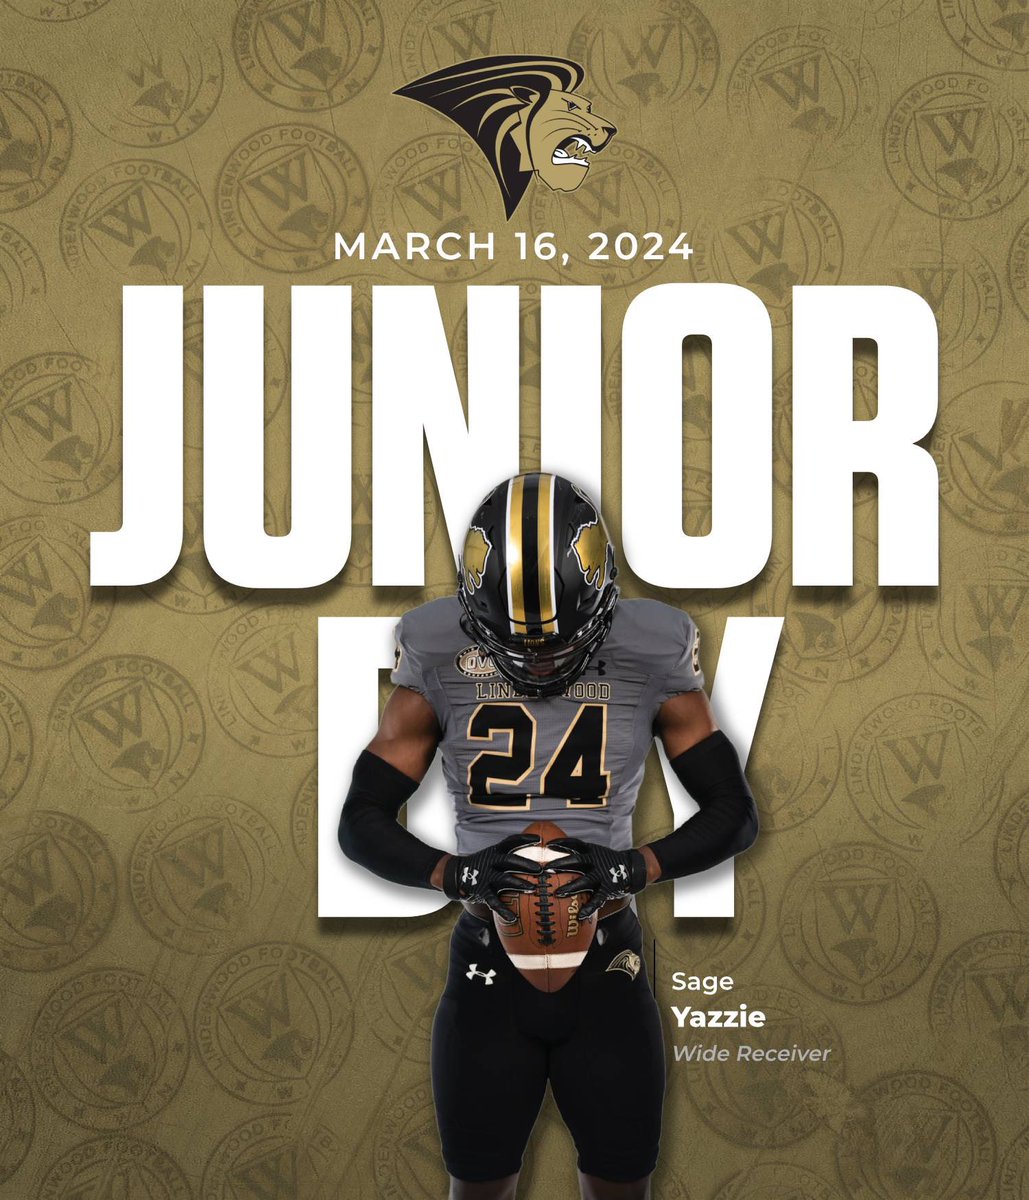 Had a great time at junior day! Thank you @stugfb @CoachGoldenberg for the invite!